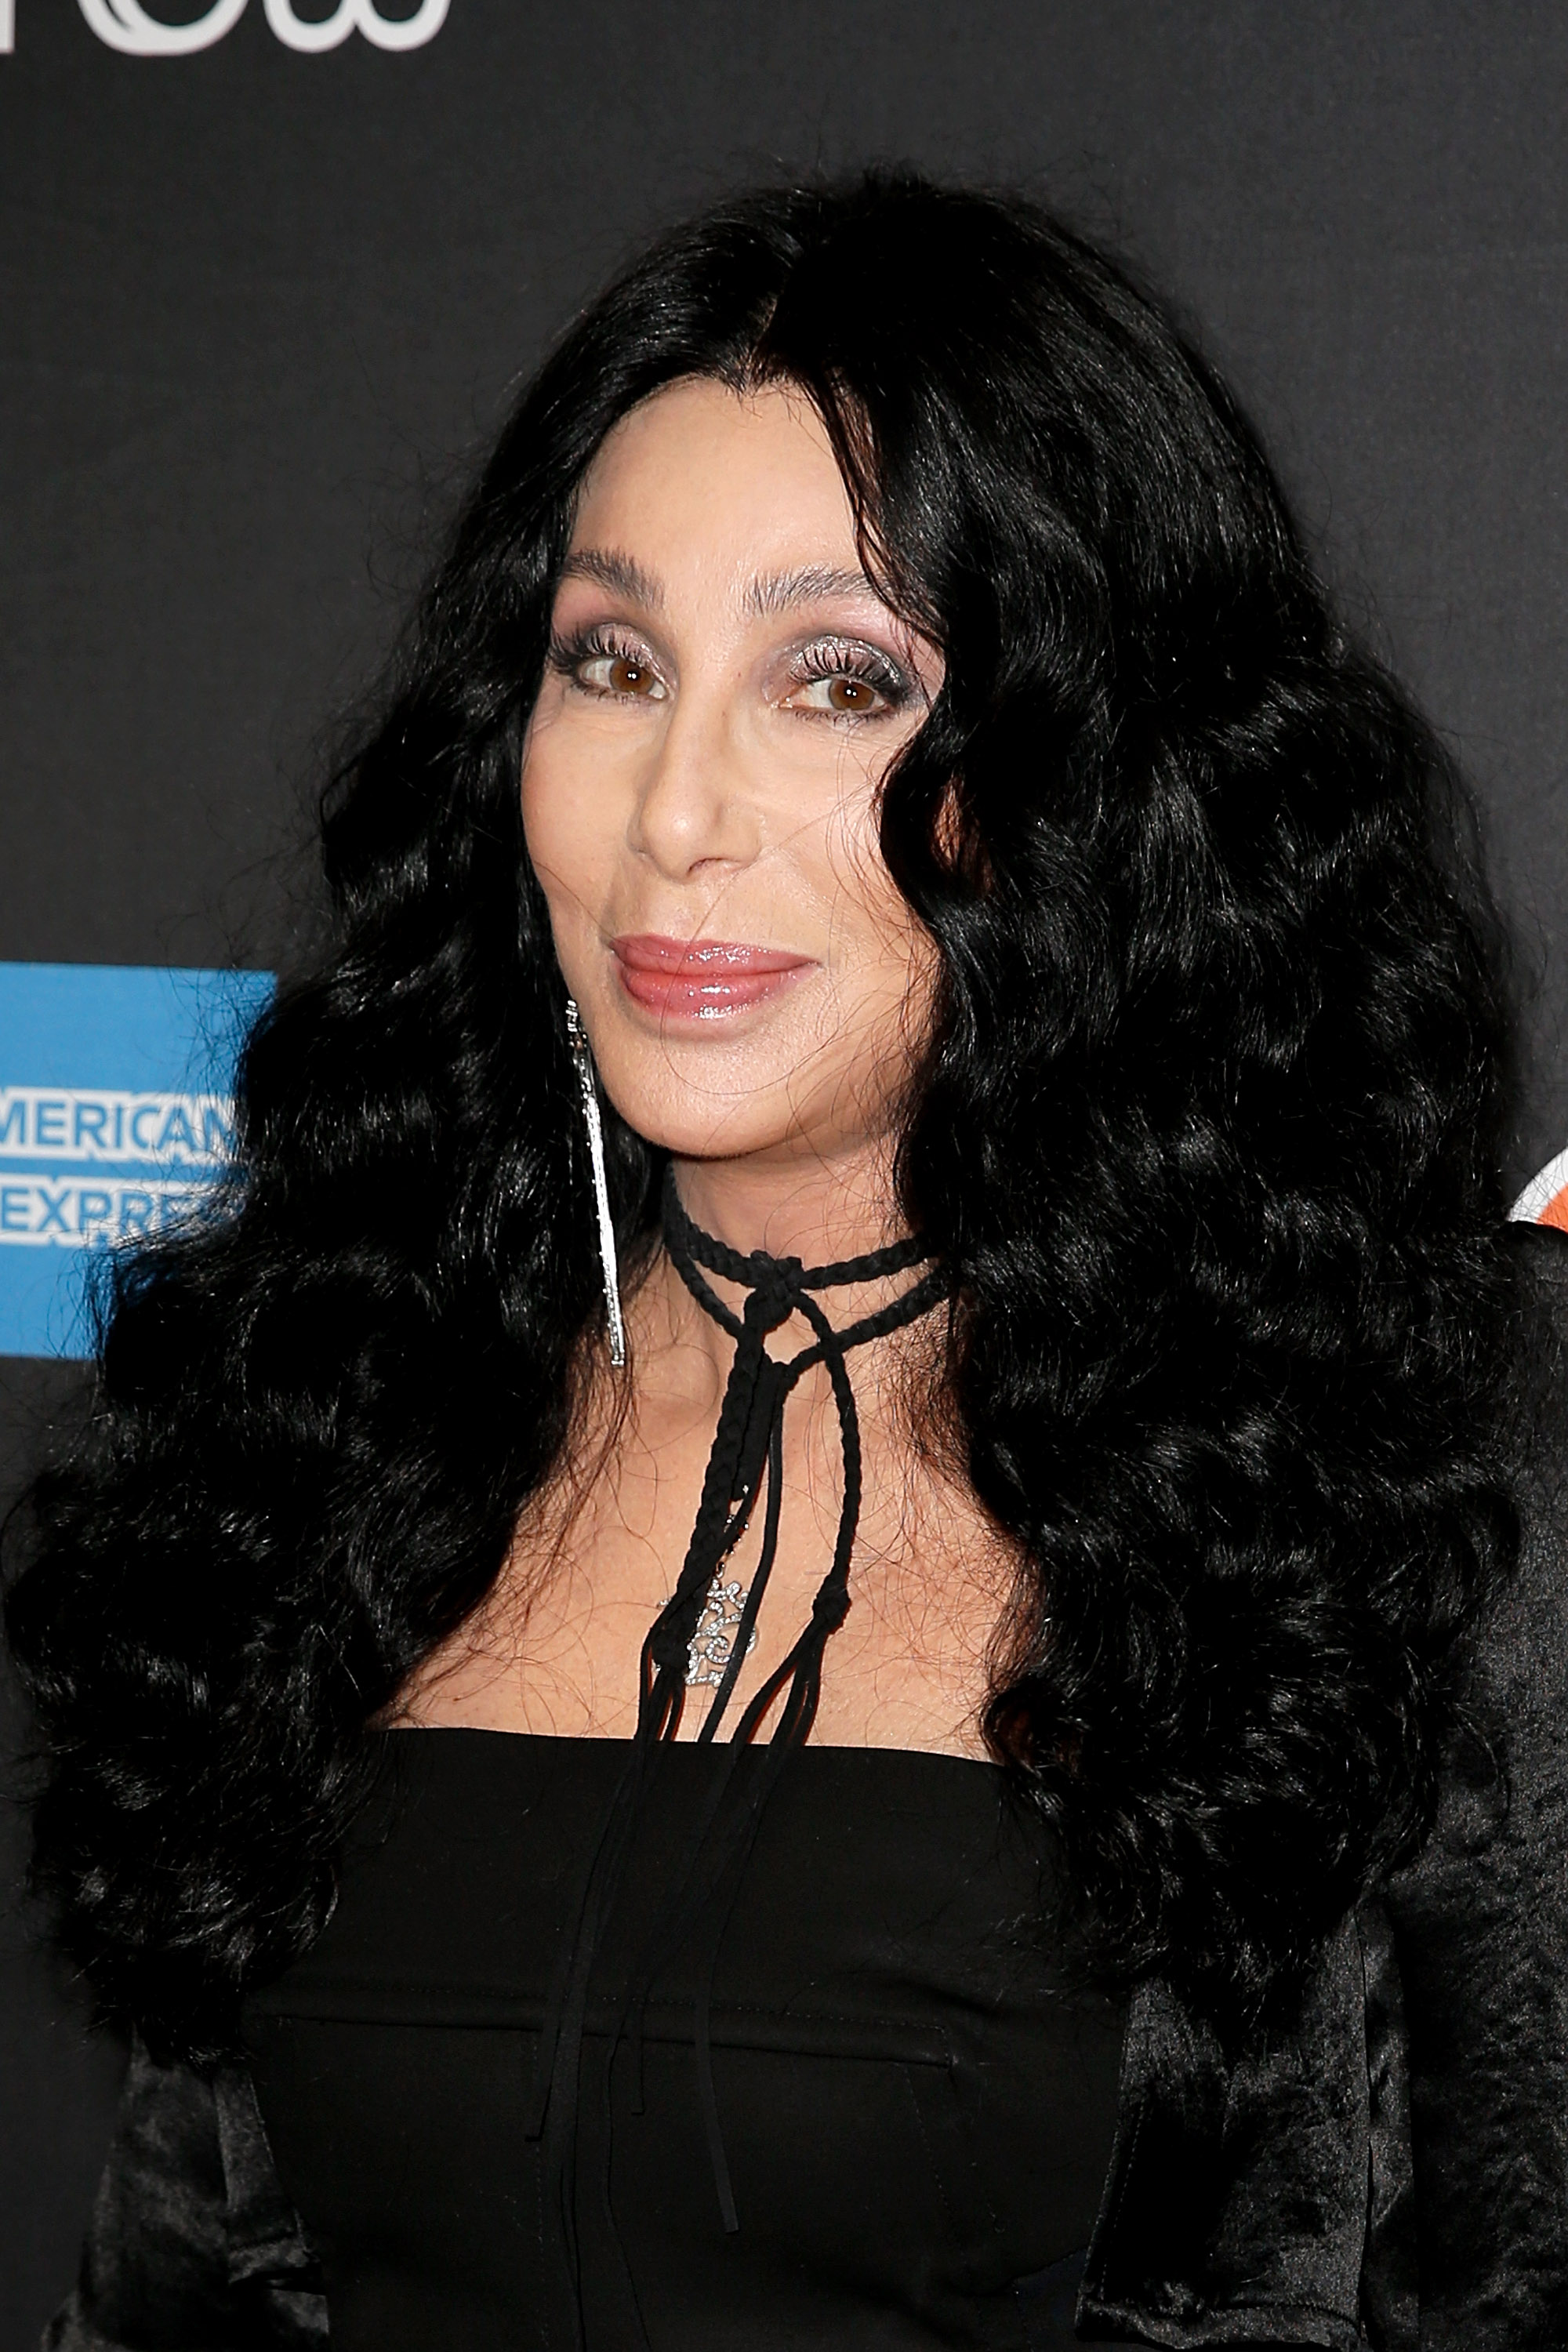 Cher attends the opening night of the new musical 'The Cher Show' on Broadway in New York City, on December 3, 2018. | Source: Getty Images